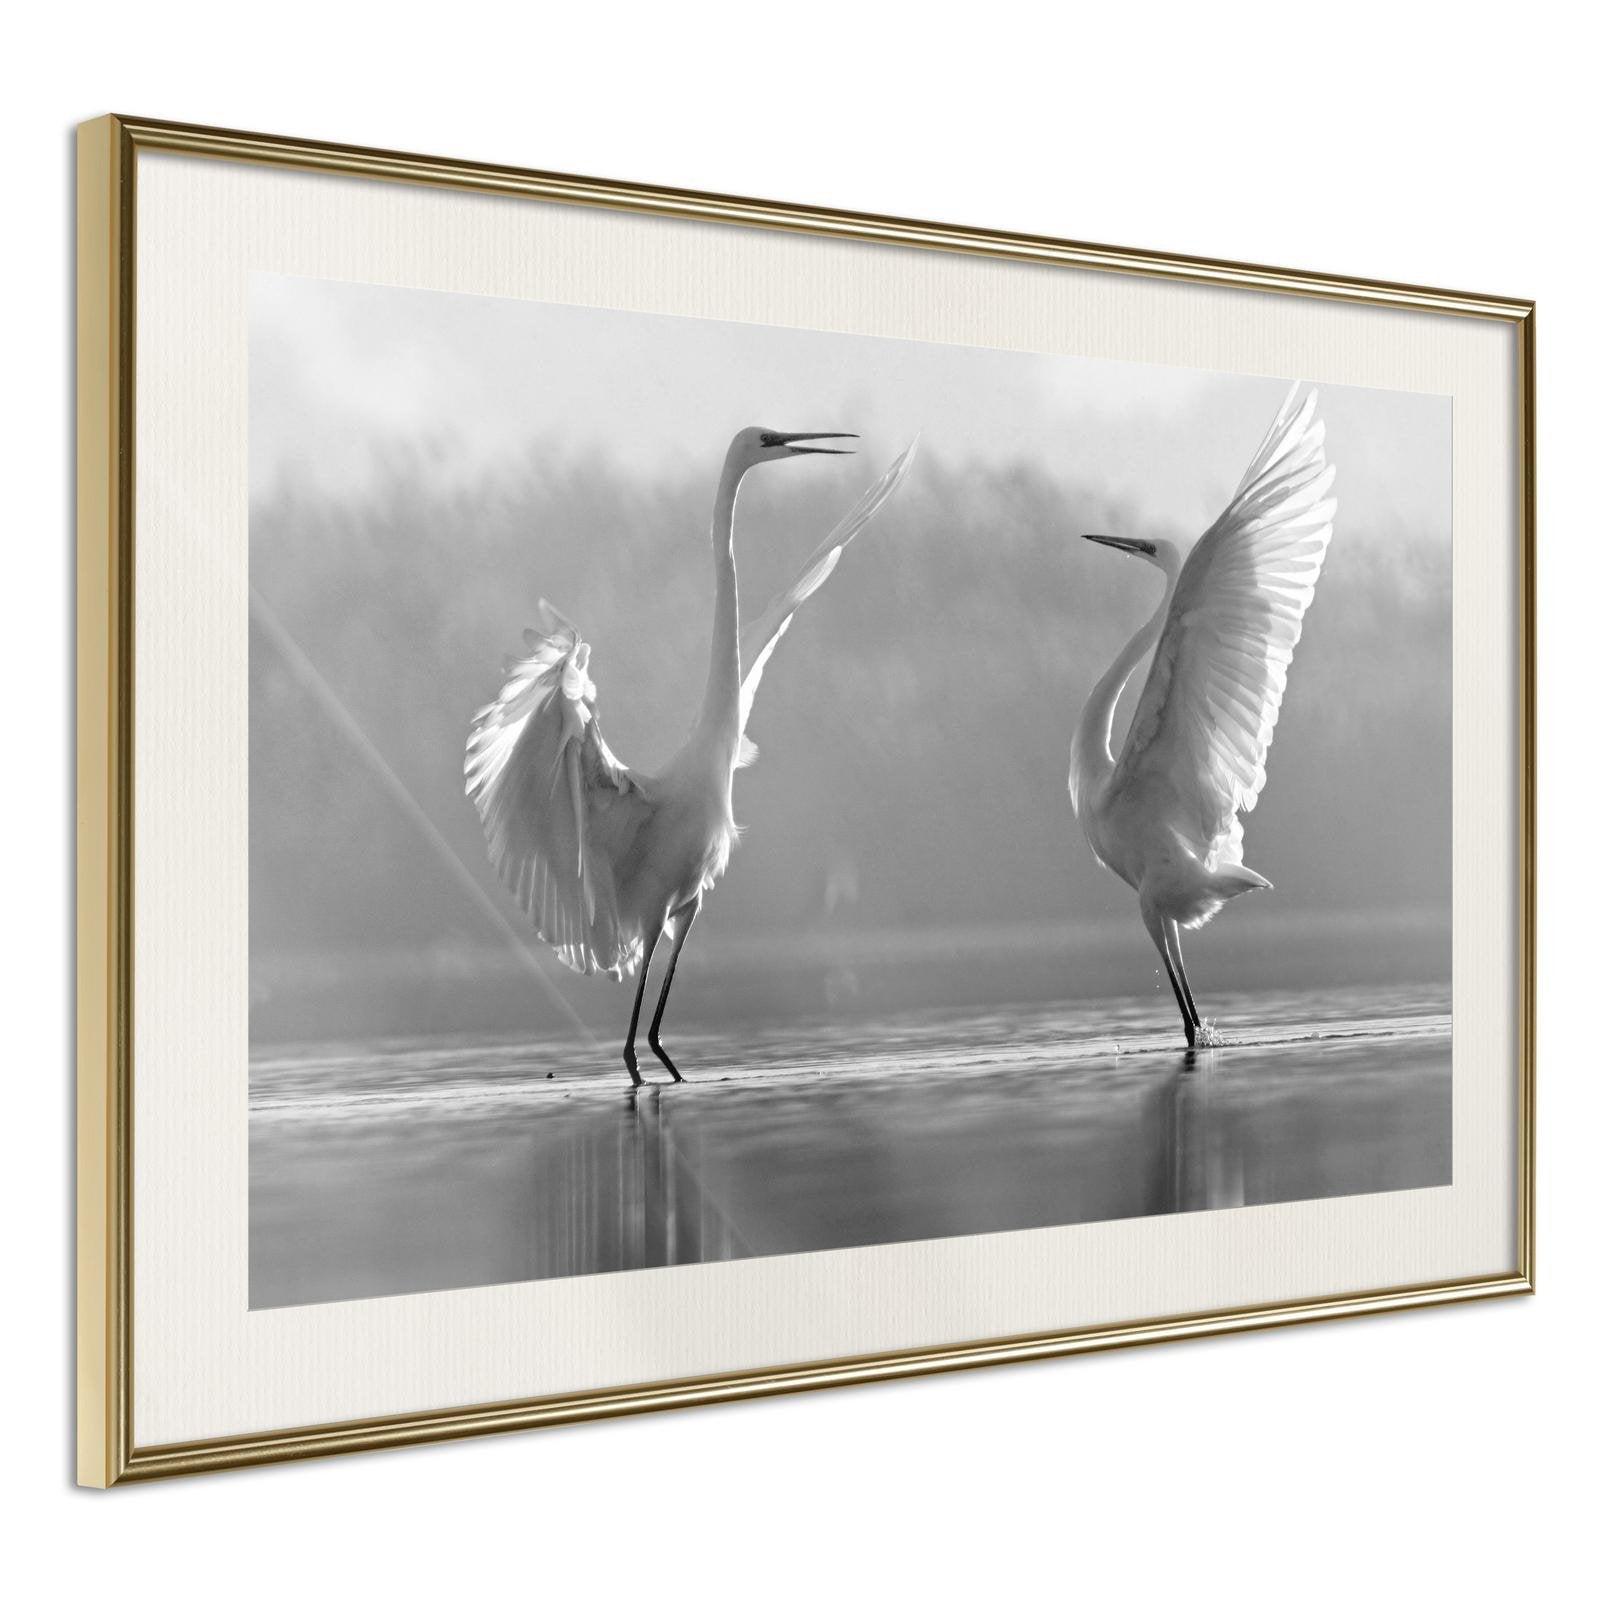 Inramad Poster / Tavla - Black and White Herons-Poster Inramad-Artgeist-30x20-Guldram med passepartout-peaceofhome.se